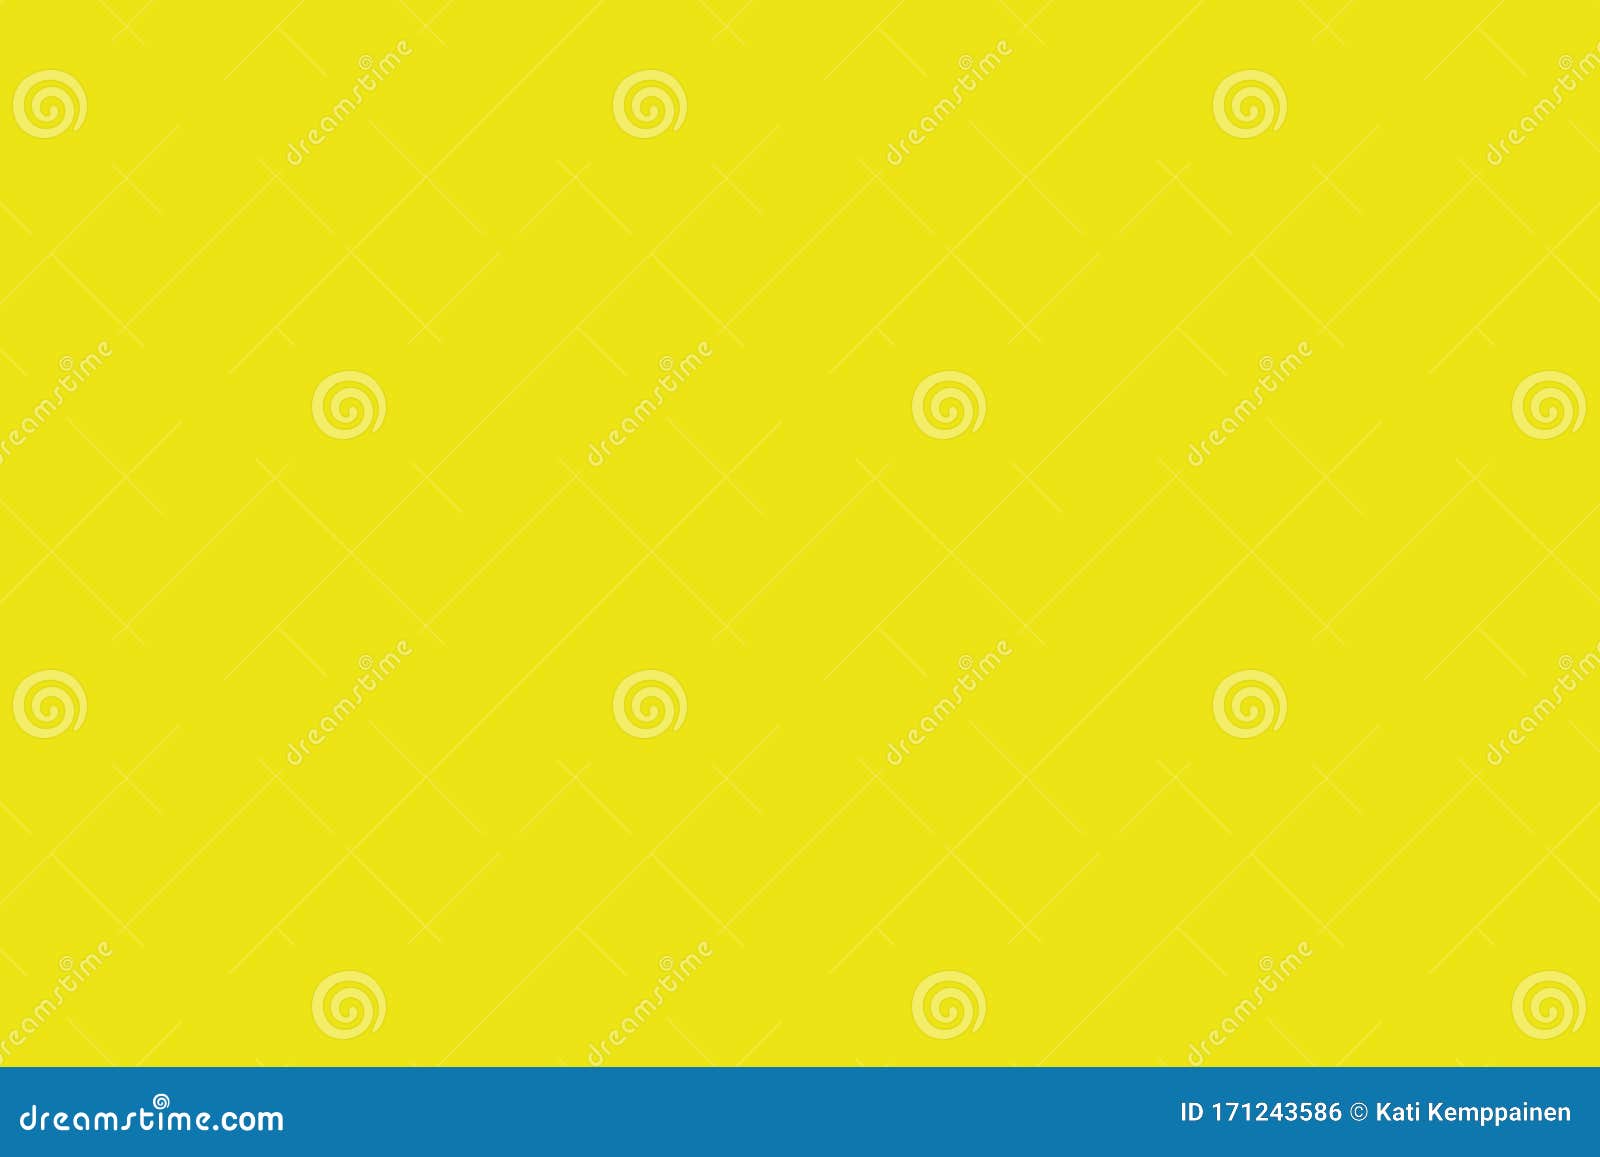 plain yellow easter background